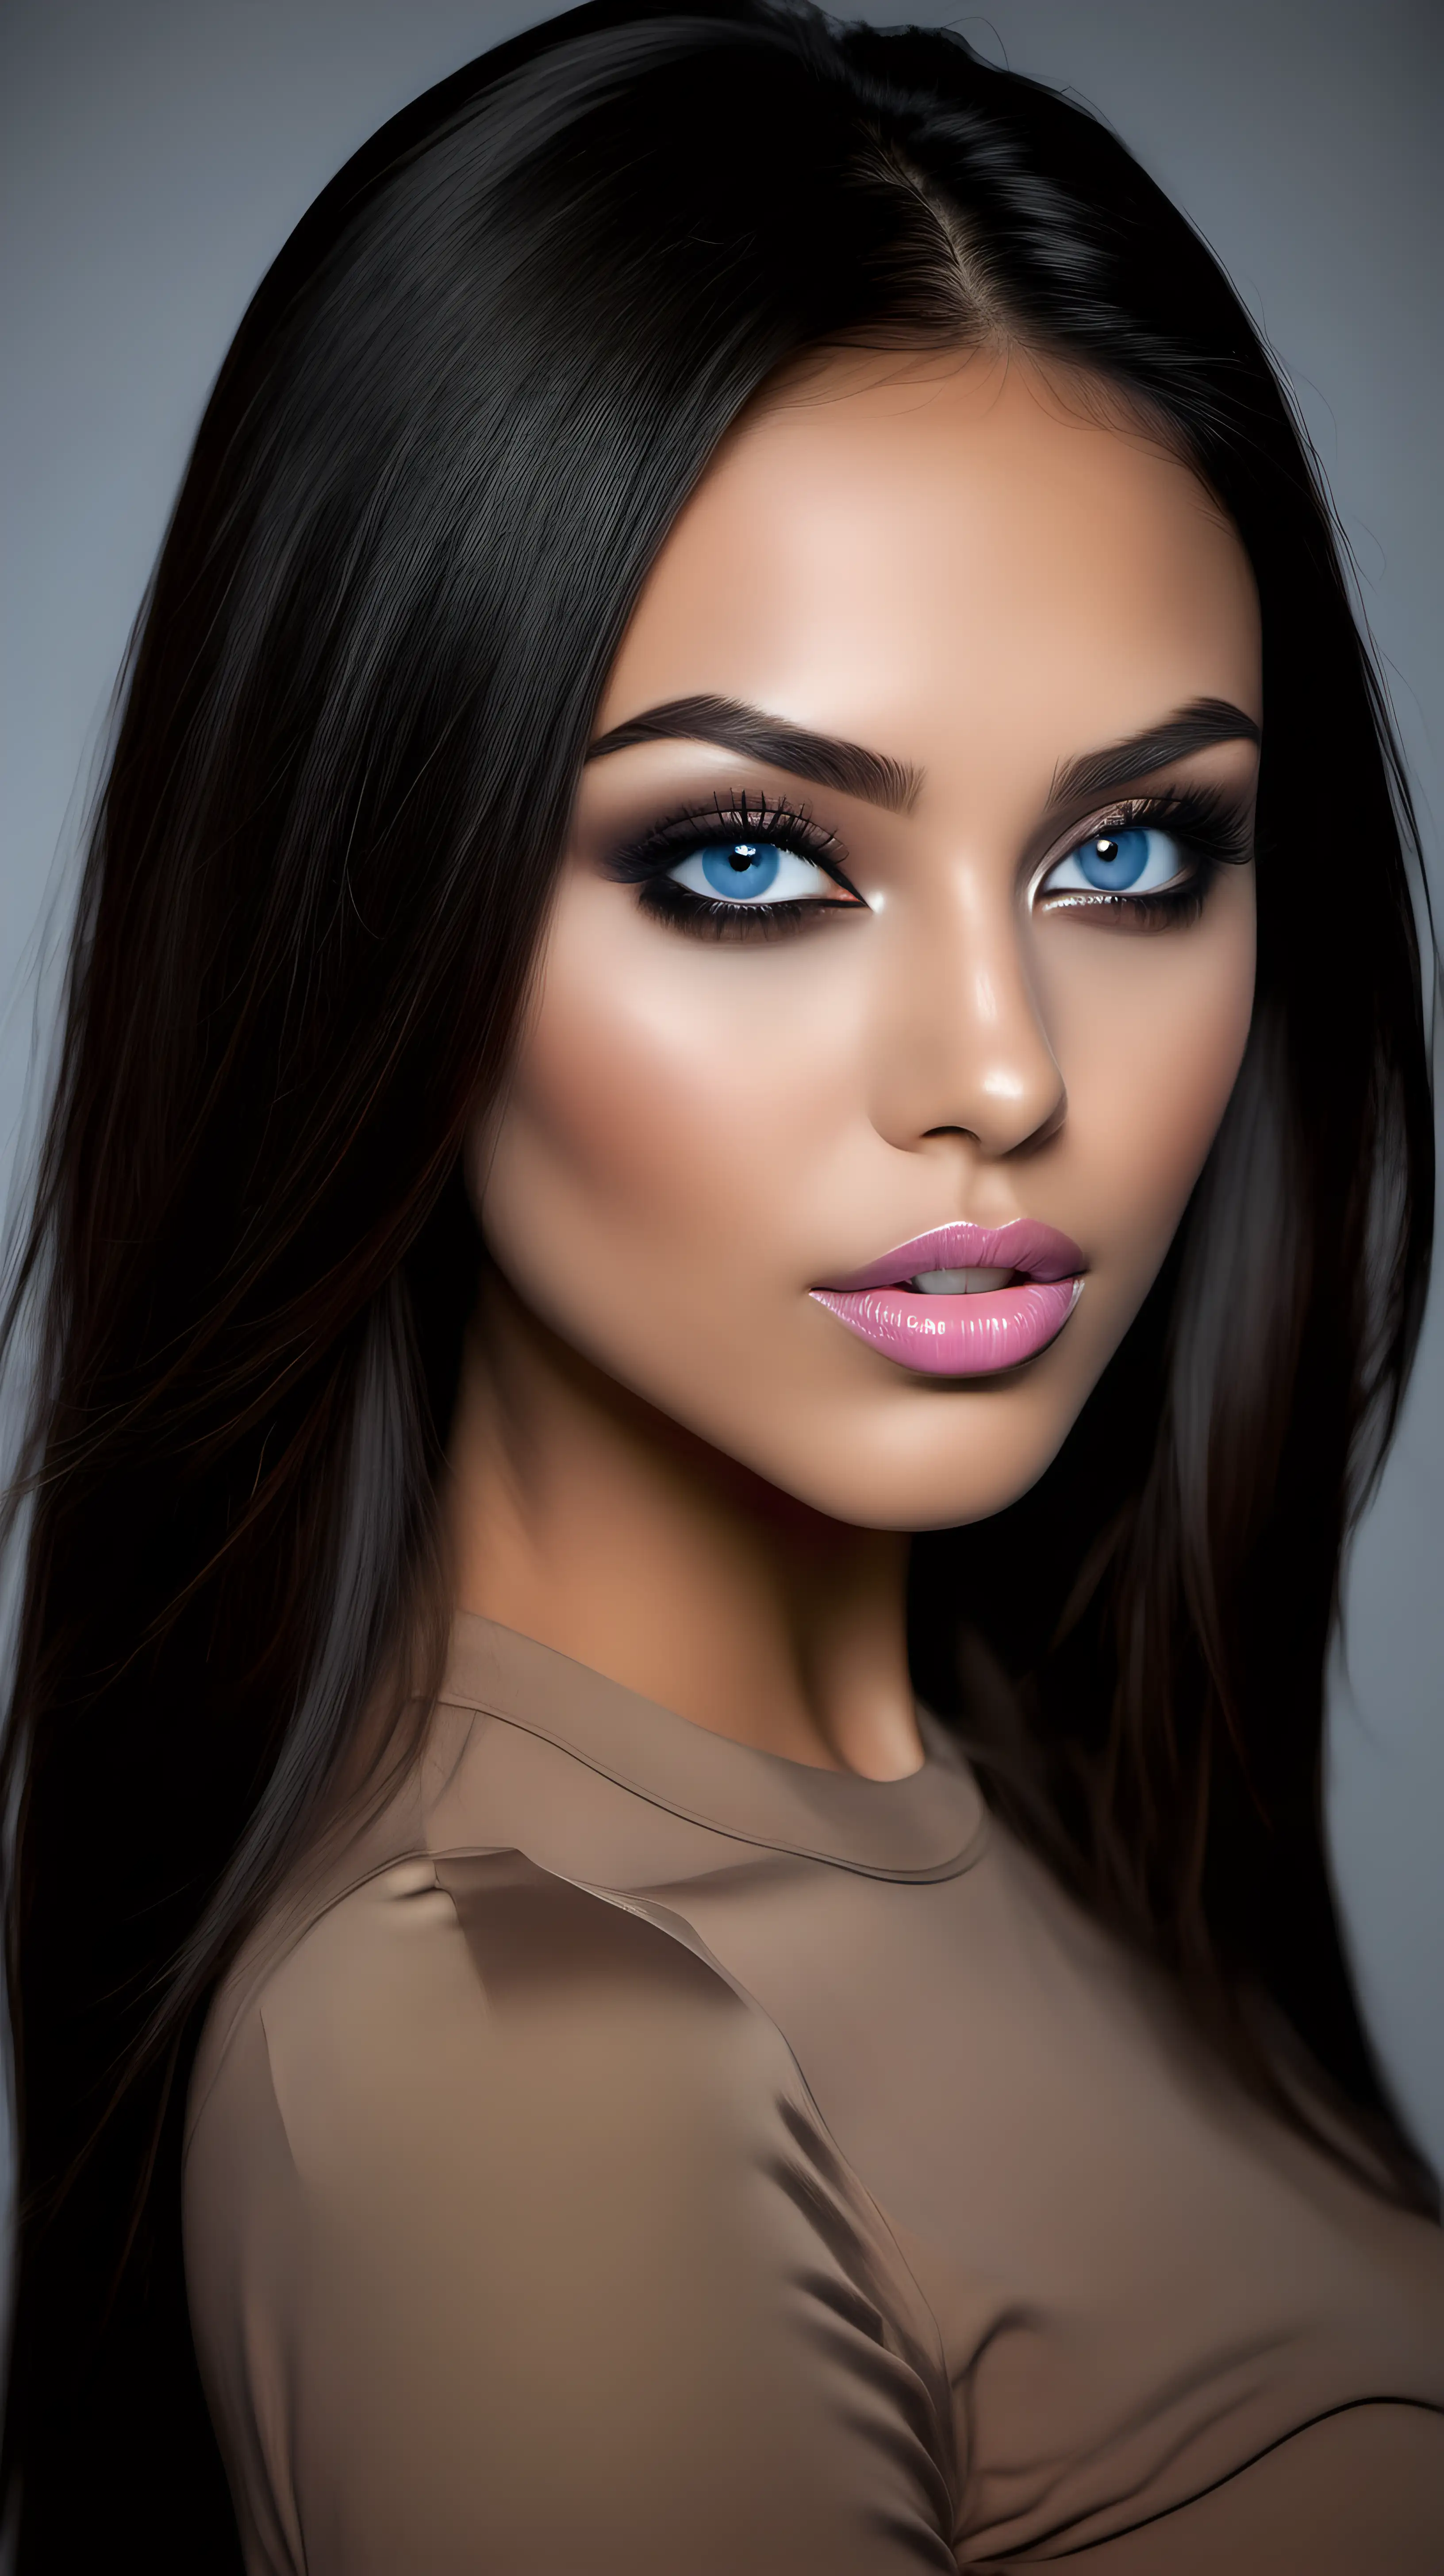 a symmetrical face with high cheekbones, a strong jawline, and almond-shaped blue eyes. eyebrows are well-defined and arched, enhancing her expressive eyes. smokey eye makeup. Long hair, dark brunette, styled straight. Smooth, olive complexion. Bronzed makeup look. Lips are full and well-defined, with lipstick shades ranging from natural pinks. Glamorous and edgy toned. . long beautiful legs, wearing a hot pants jeans, high heels. taken with a 85mm lens